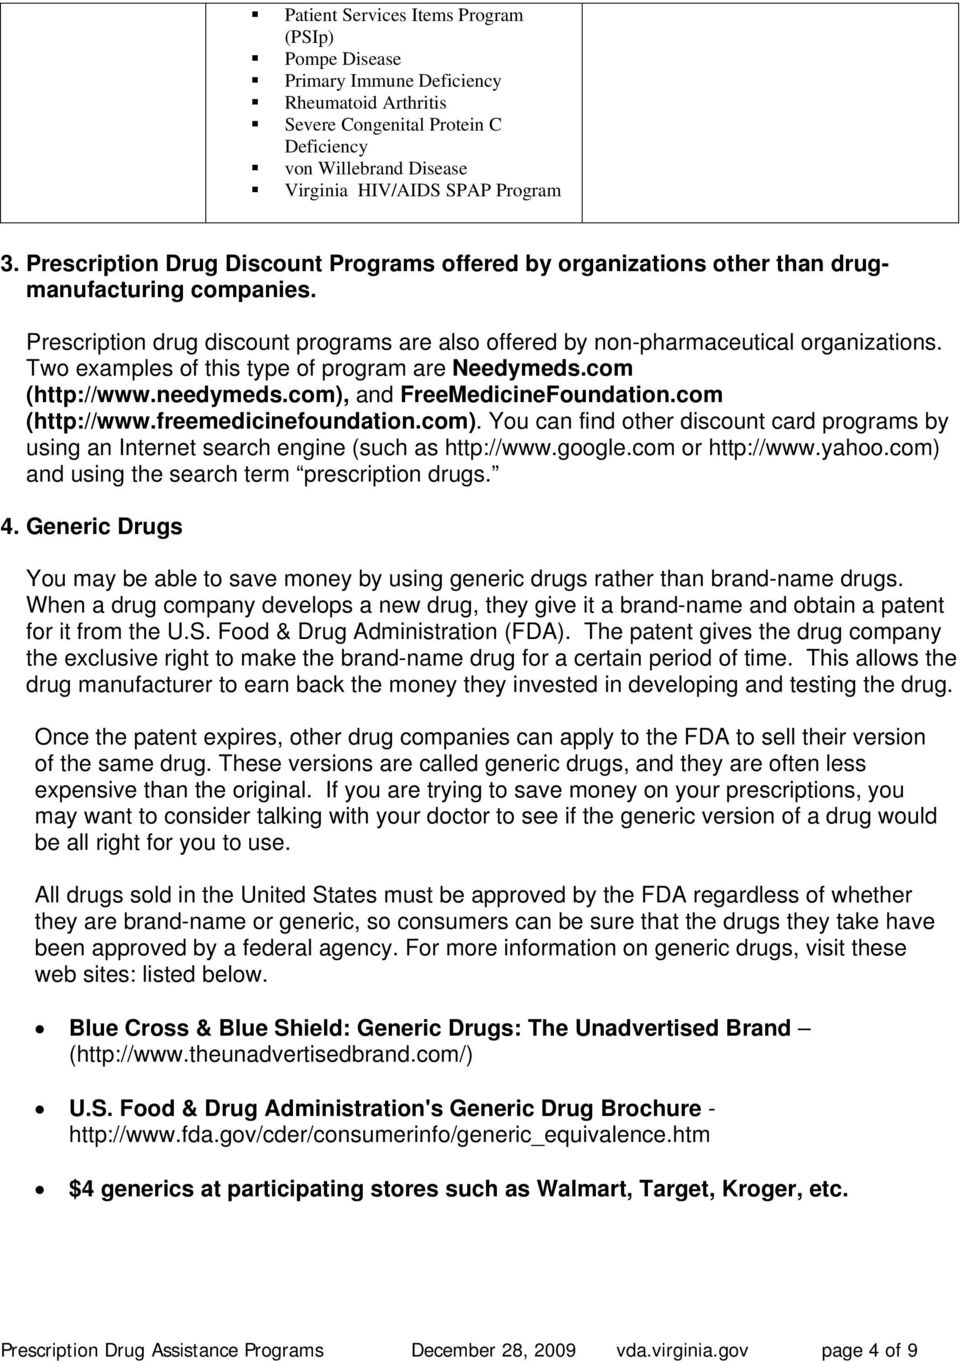 Two examples of this type of program are Needymeds.com (http://www.needymeds.com), and FreeMedicineFoundation.com (http://www.freemedicinefoundation.com). You can find other discount card programs by using an Internet search engine (such as http://www.